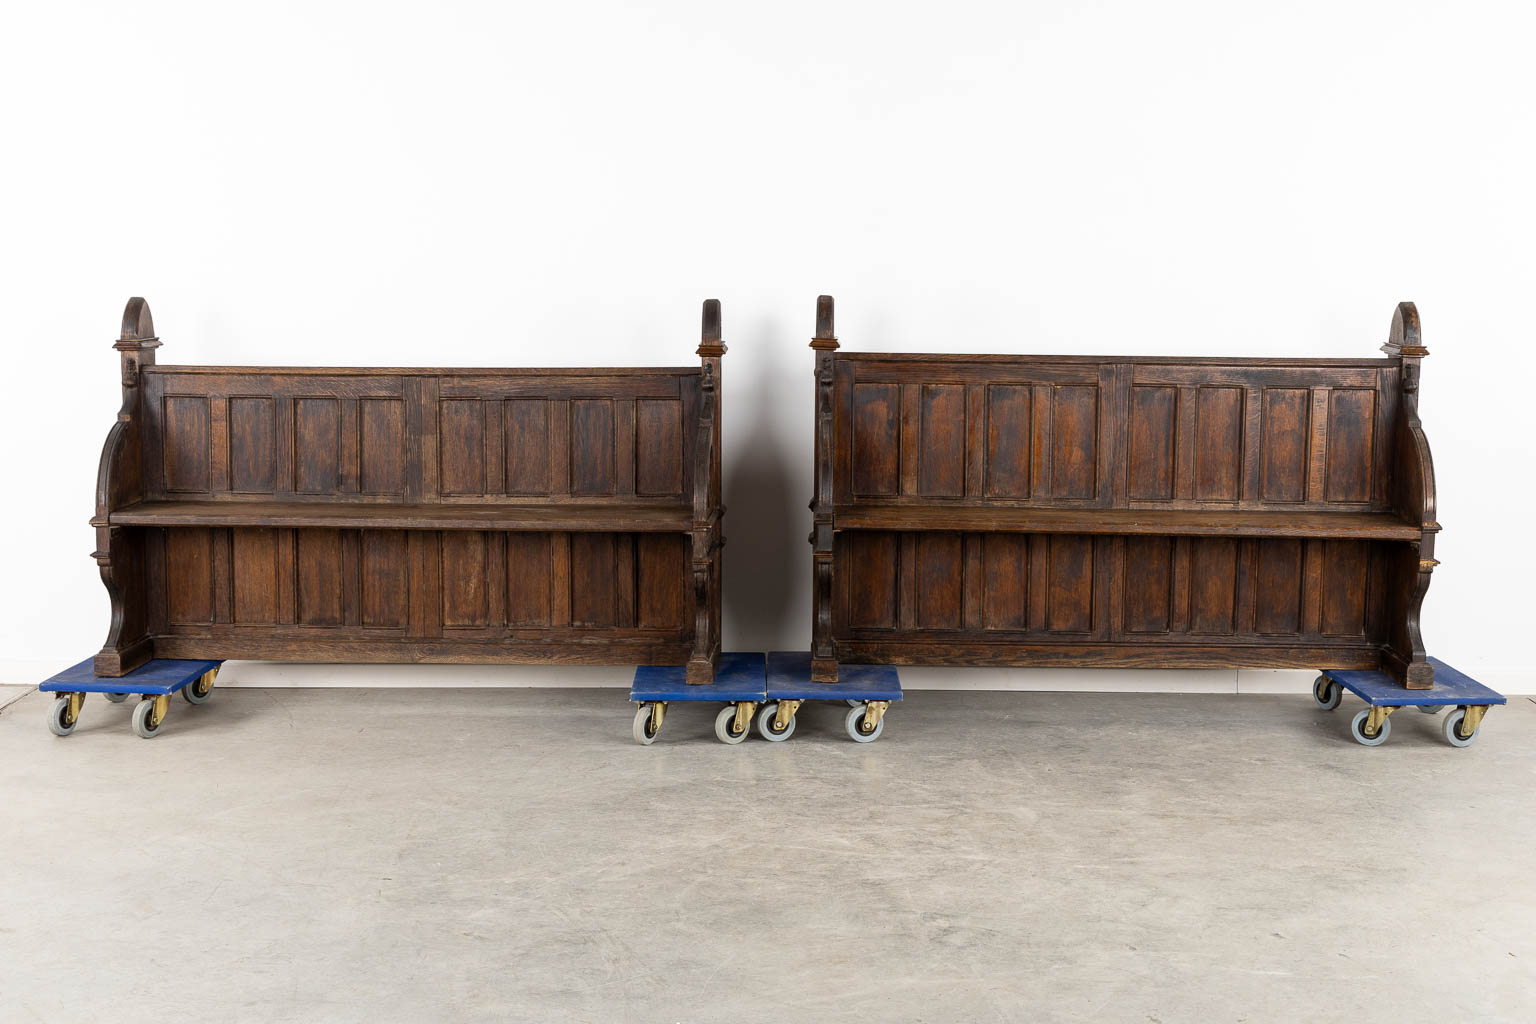 6 identical 'Church Benches' sculptured oak, Gothic Revival. (L:46 x W:164 x H:100 cm) - Image 10 of 12